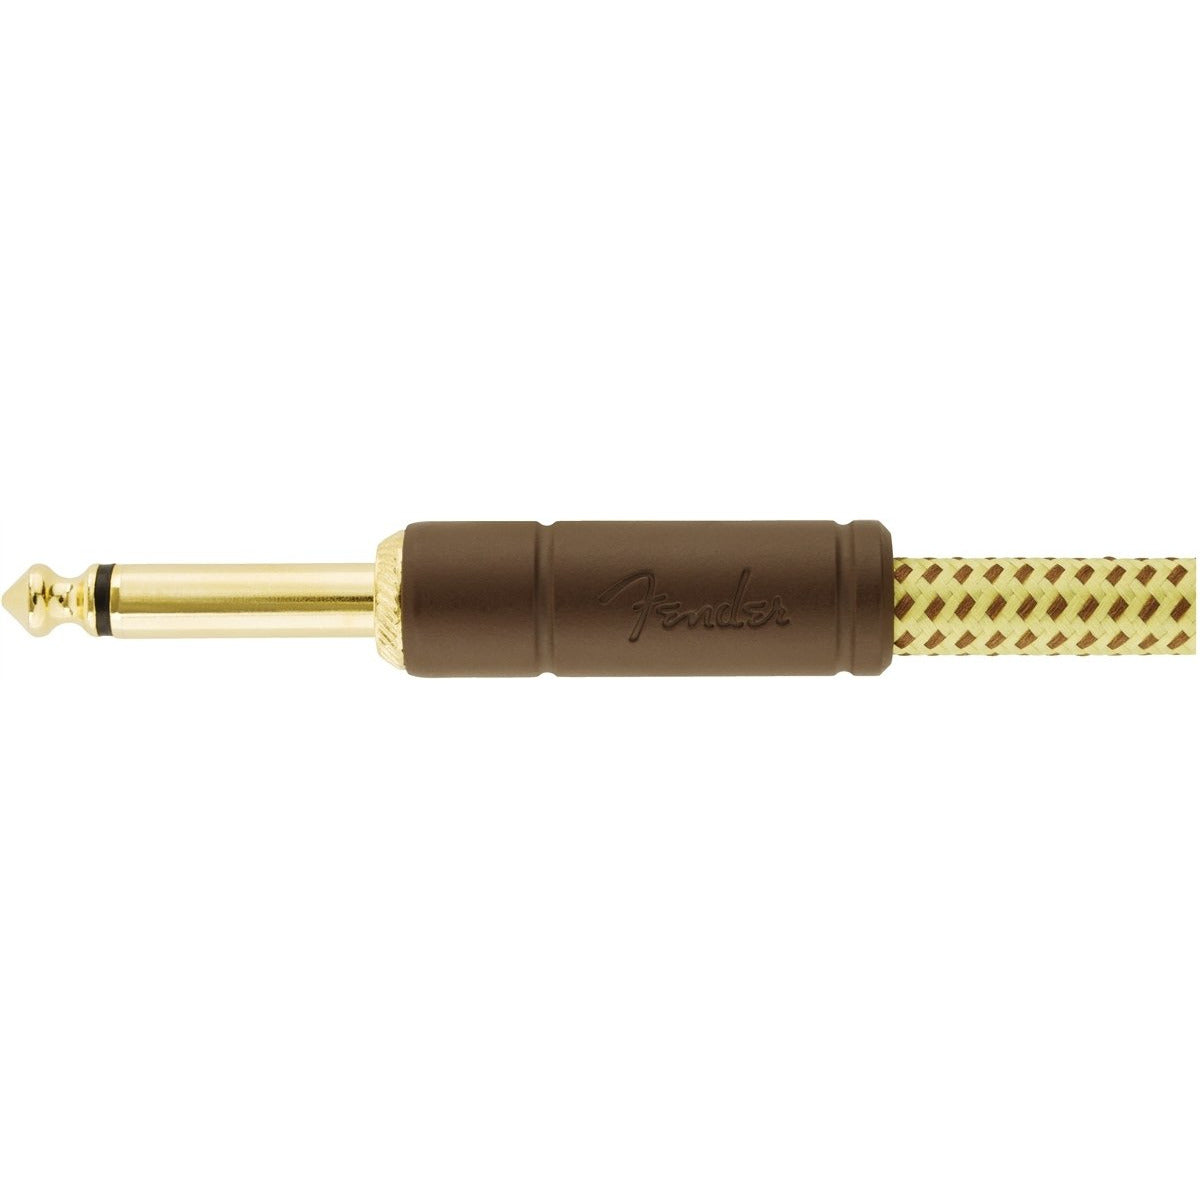 Image 4 of Fender Deluxe Series Instrument Cable, 15', Angled End, Tweed - SKU# FDLX-15A-TWD : Product Type Cables & Accessories : Elderly Instruments